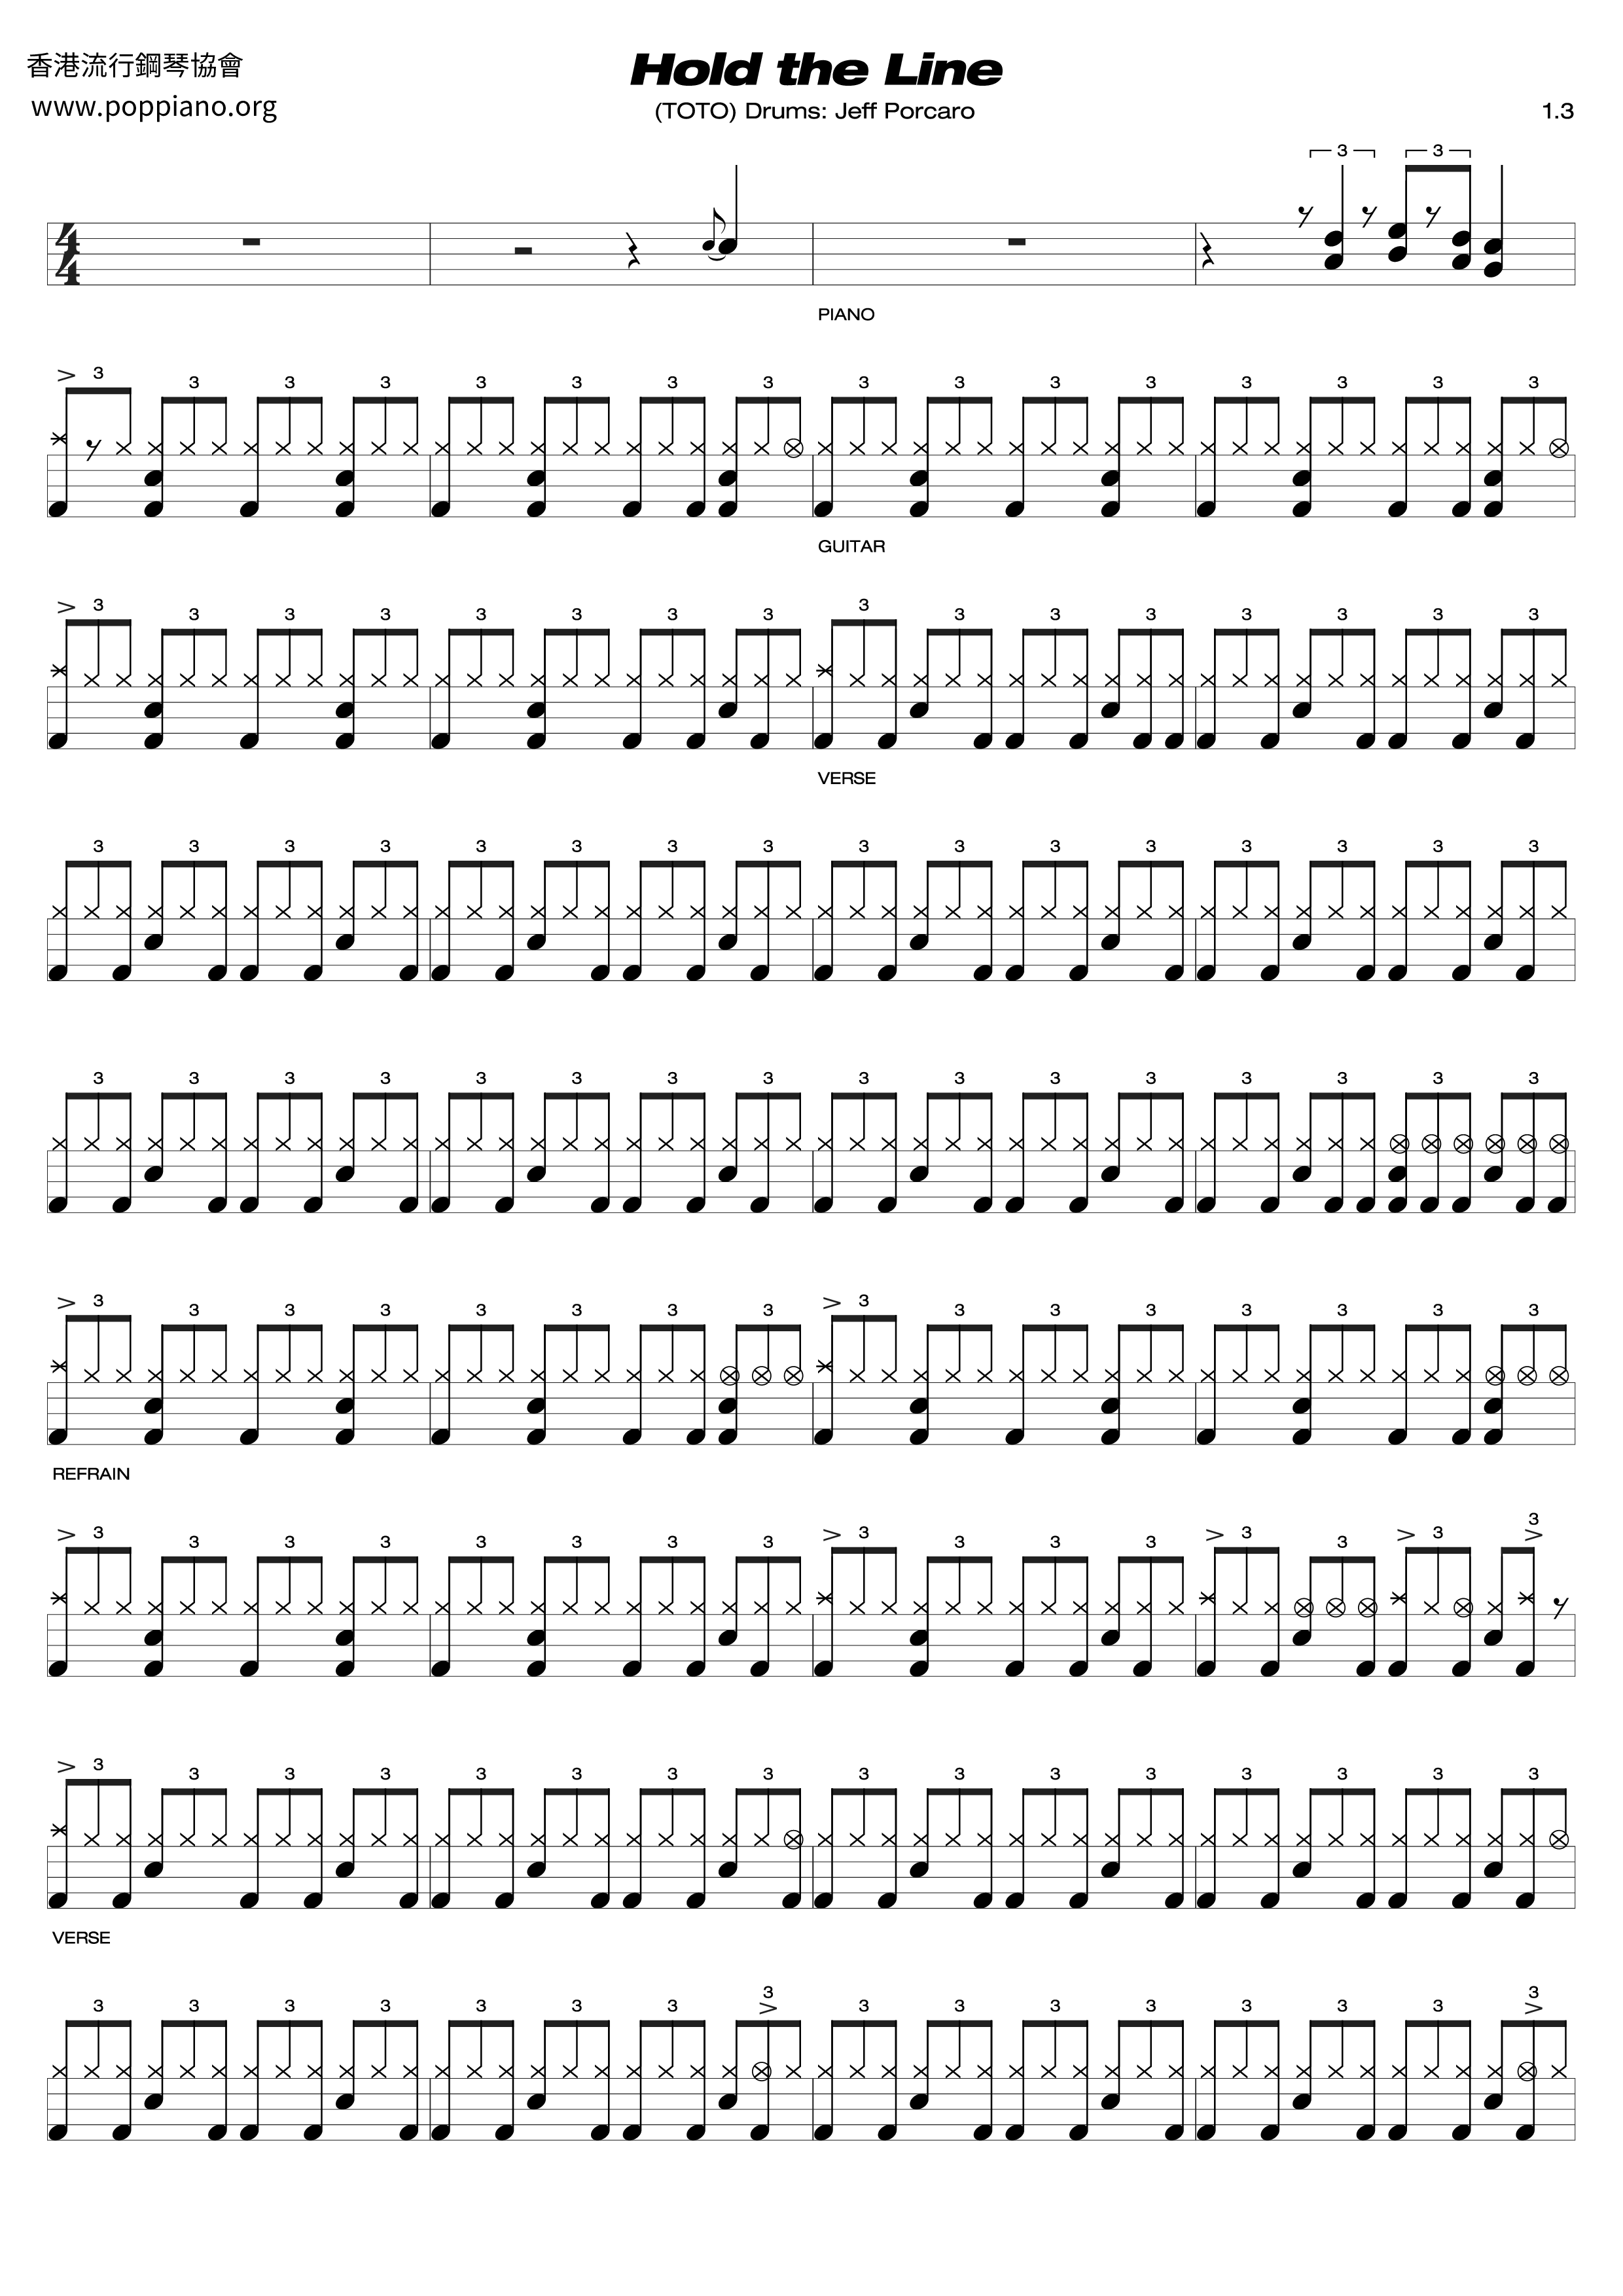 Toto Hold The Line Drum Tab Pdf Free Score Download